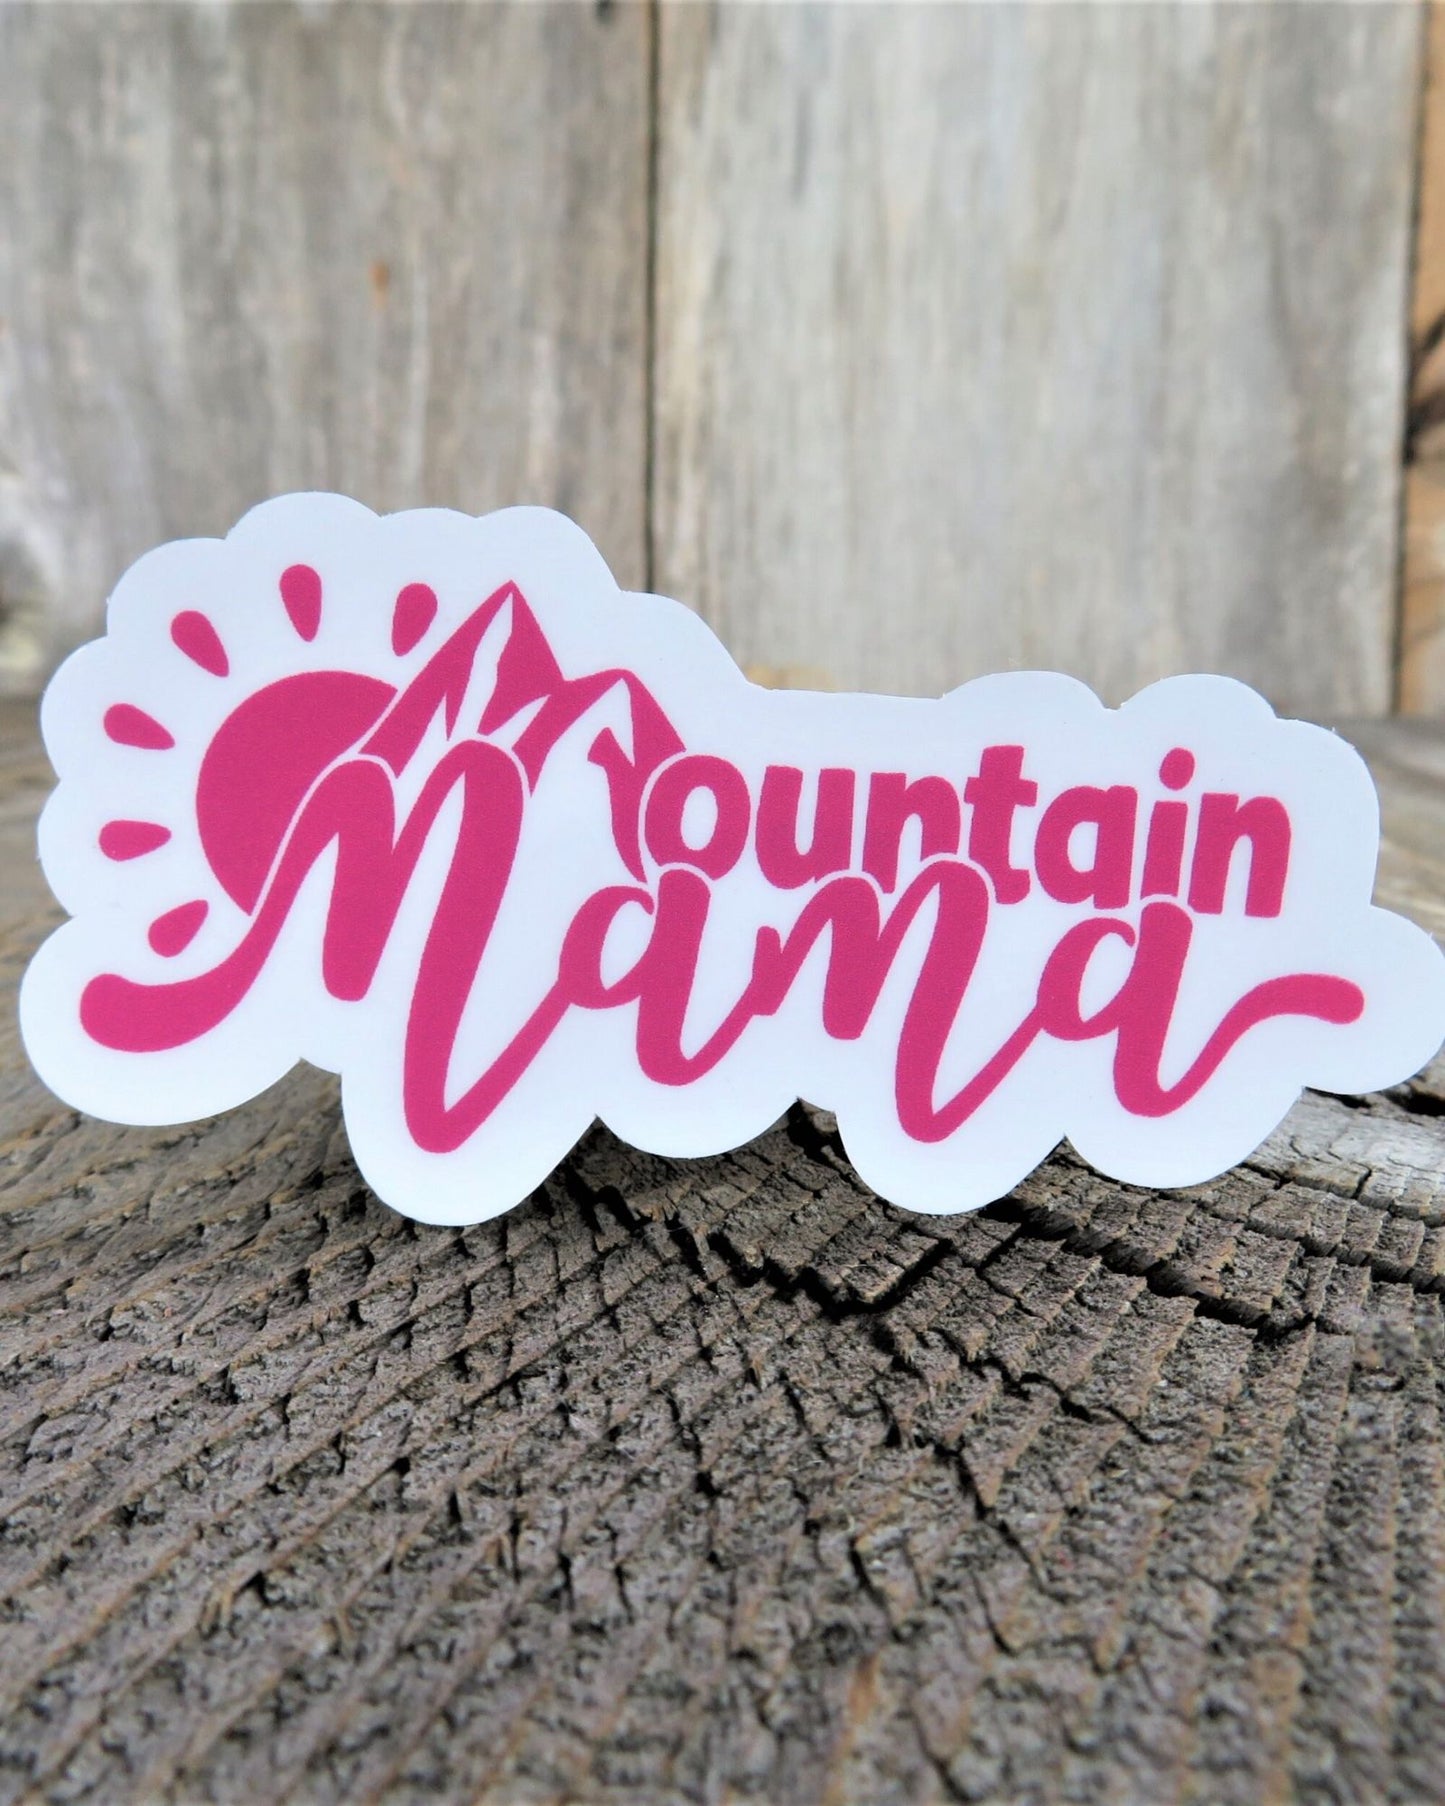 Mountain Mama Sticker Hot Pink Decal Full Color Waterproof Car Water Bottle Laptop